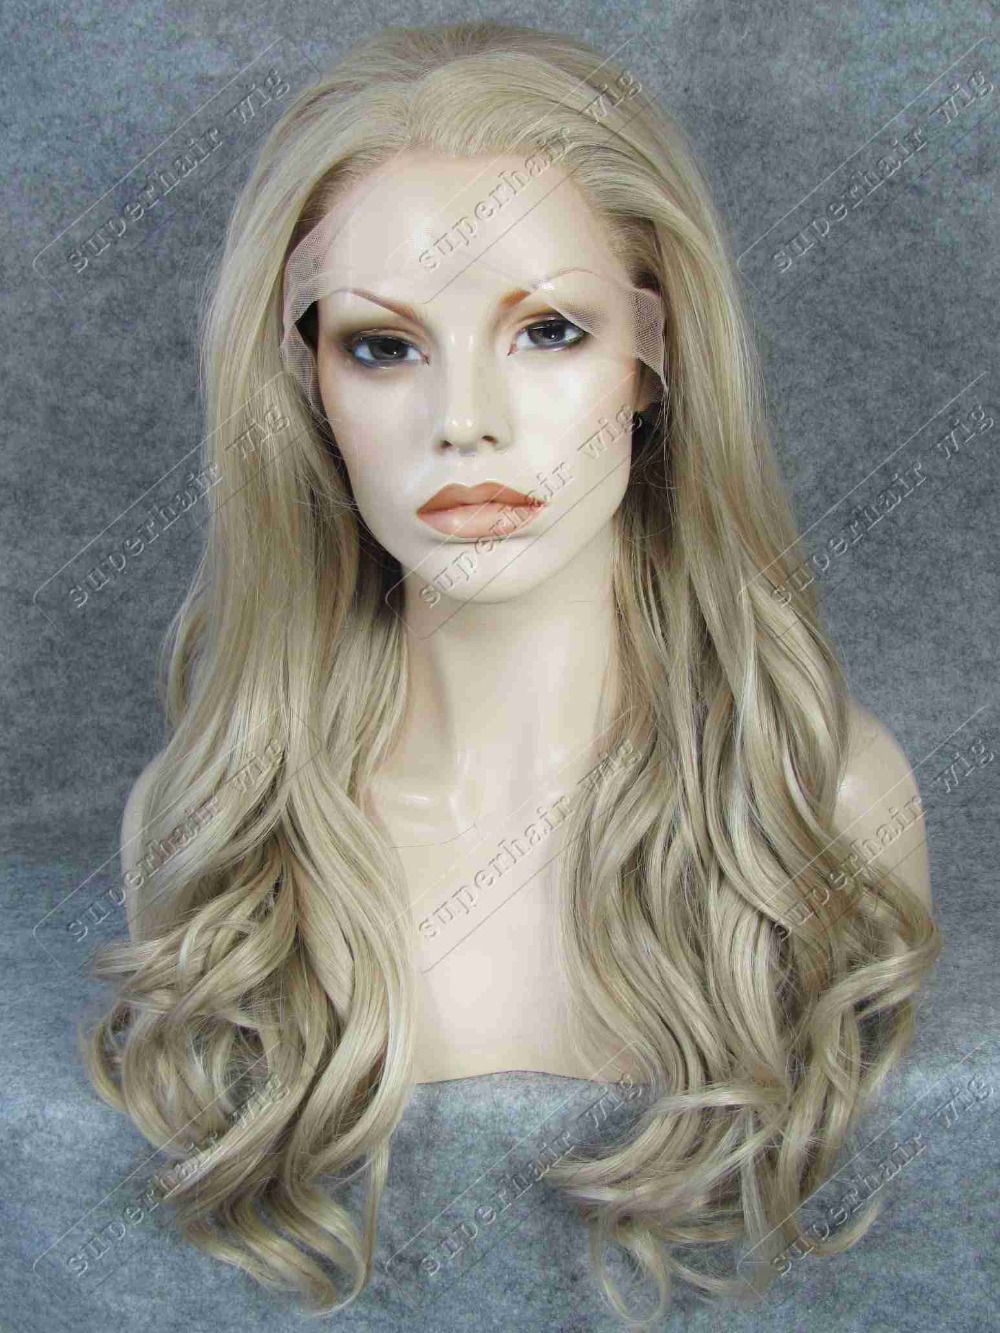 S07 Body Wavy Ash Blonde Long Synthetic Hair Lace Front Fashion